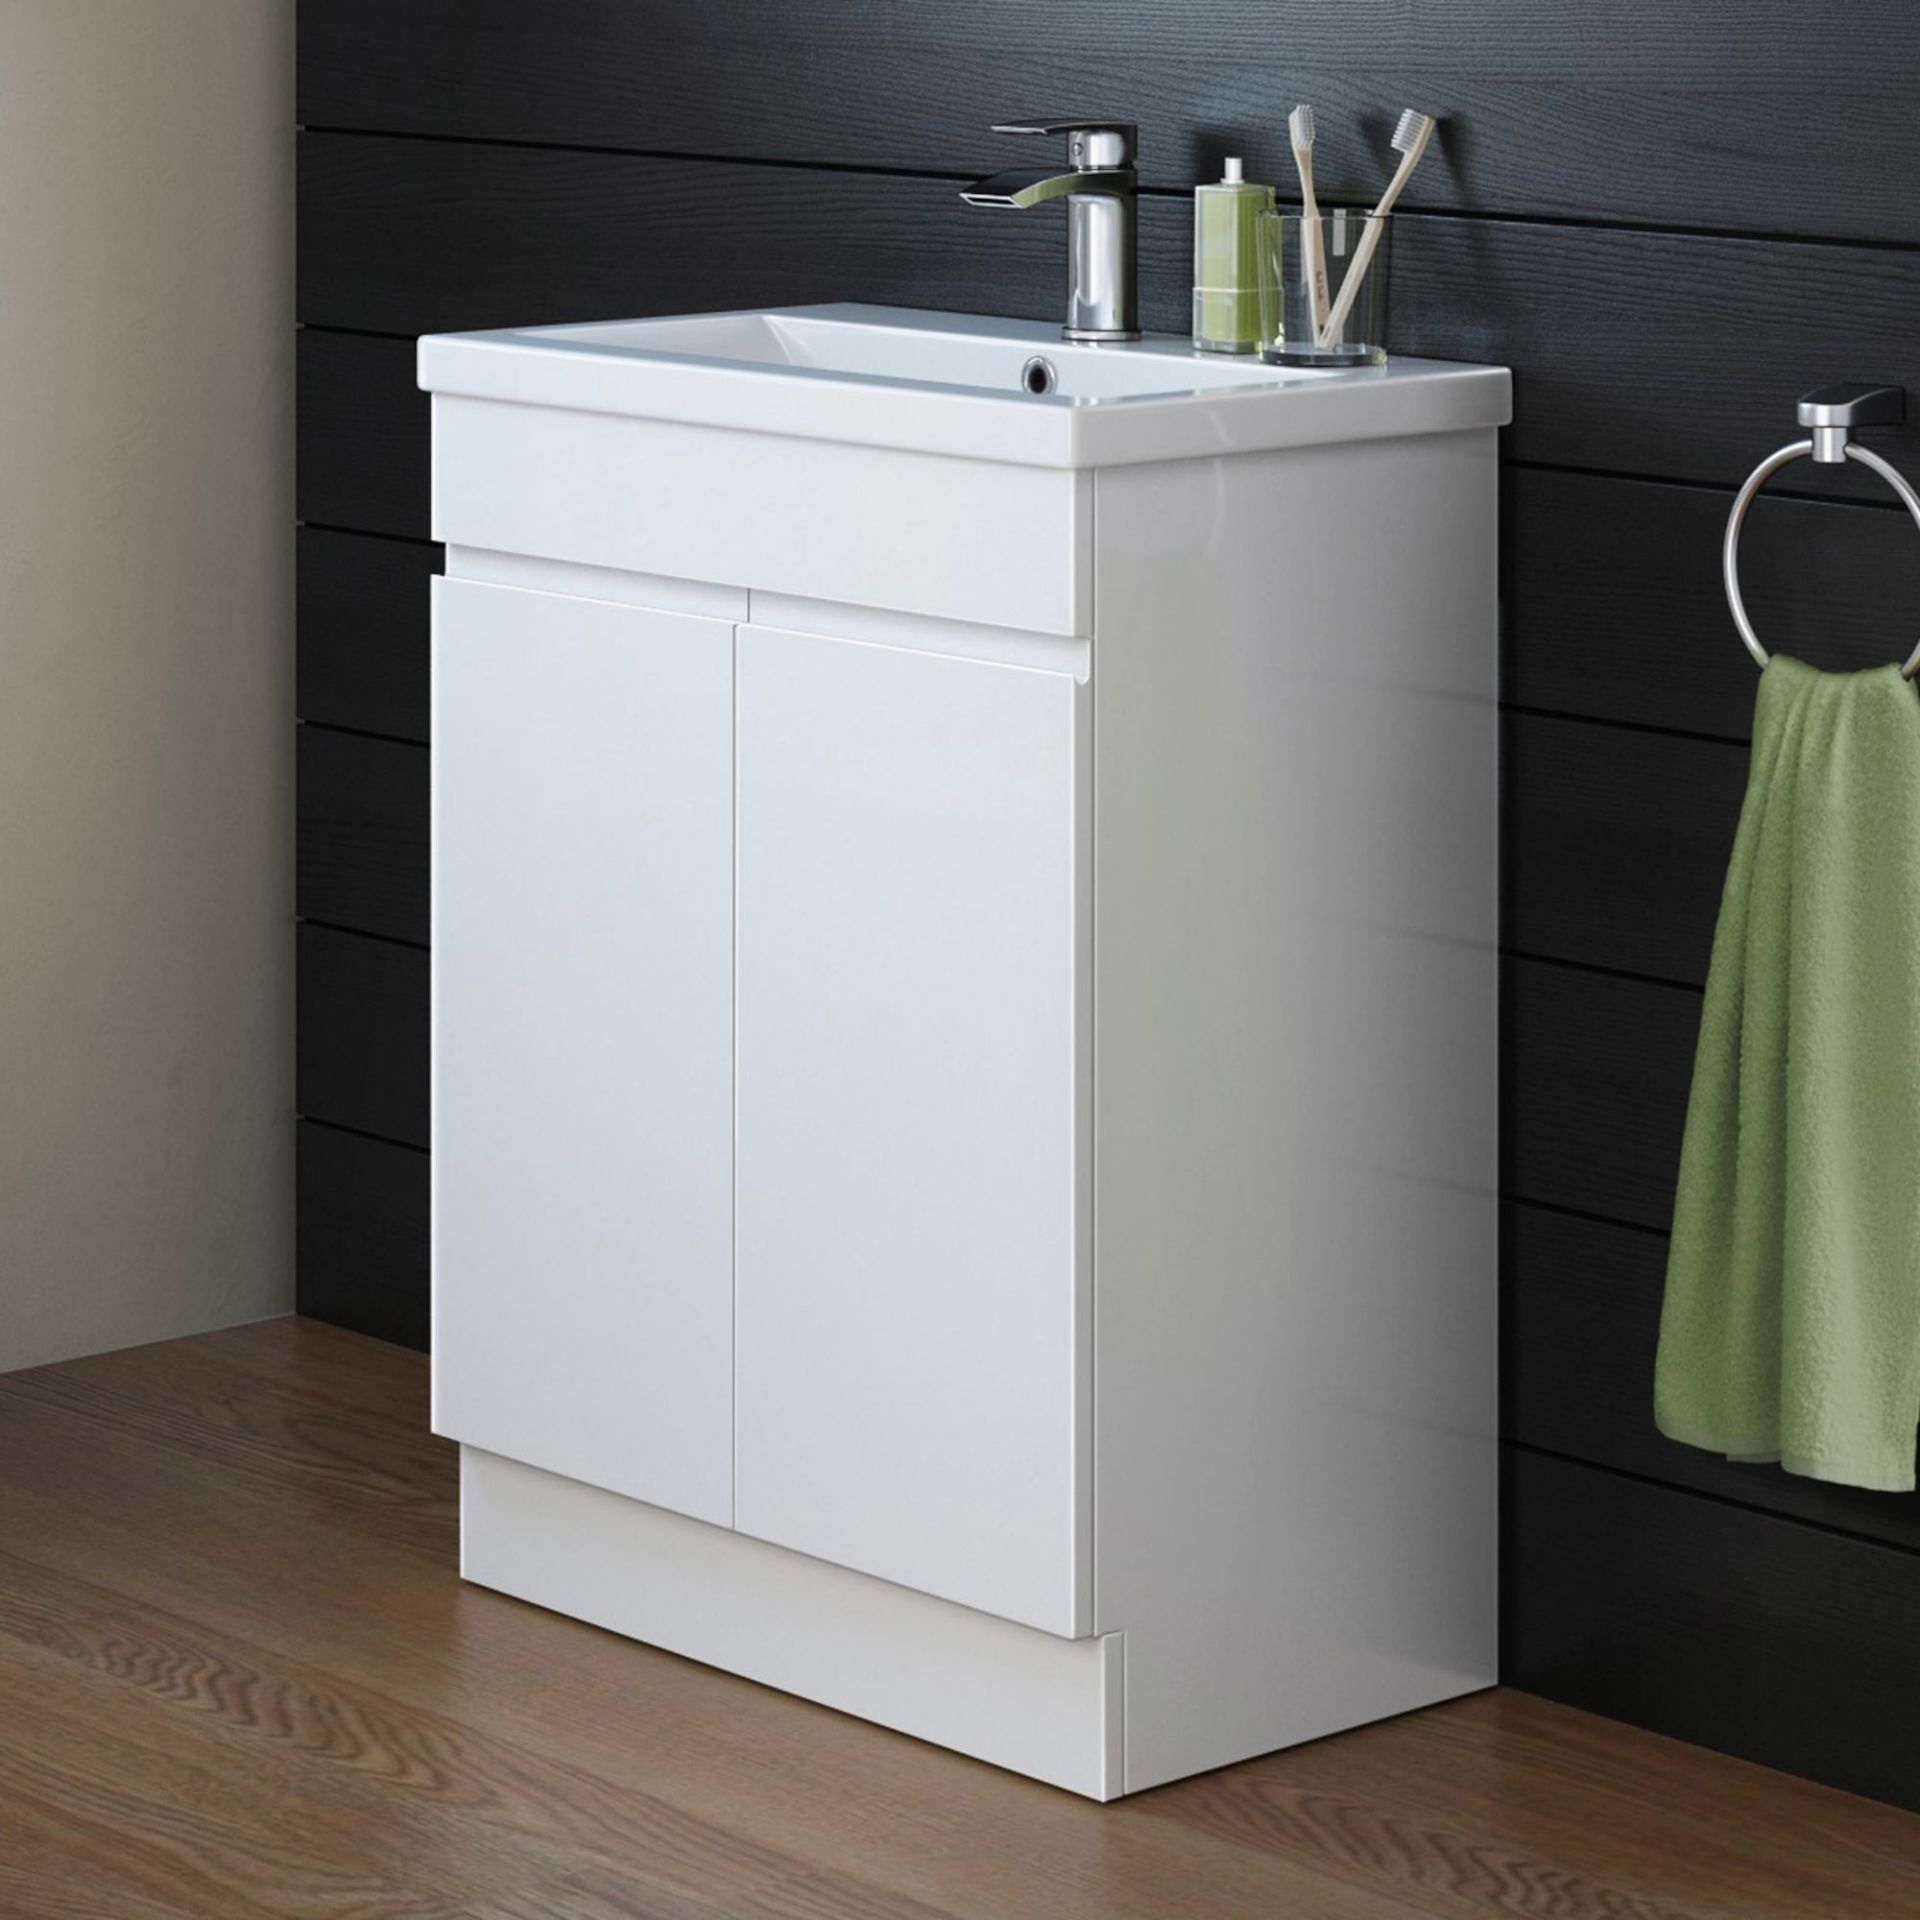 BRAND NEW BOXED 600mm Trent Gloss White Sink Cabinet - Floor Standing.RRP £499.99.Comes comple... - Image 2 of 4